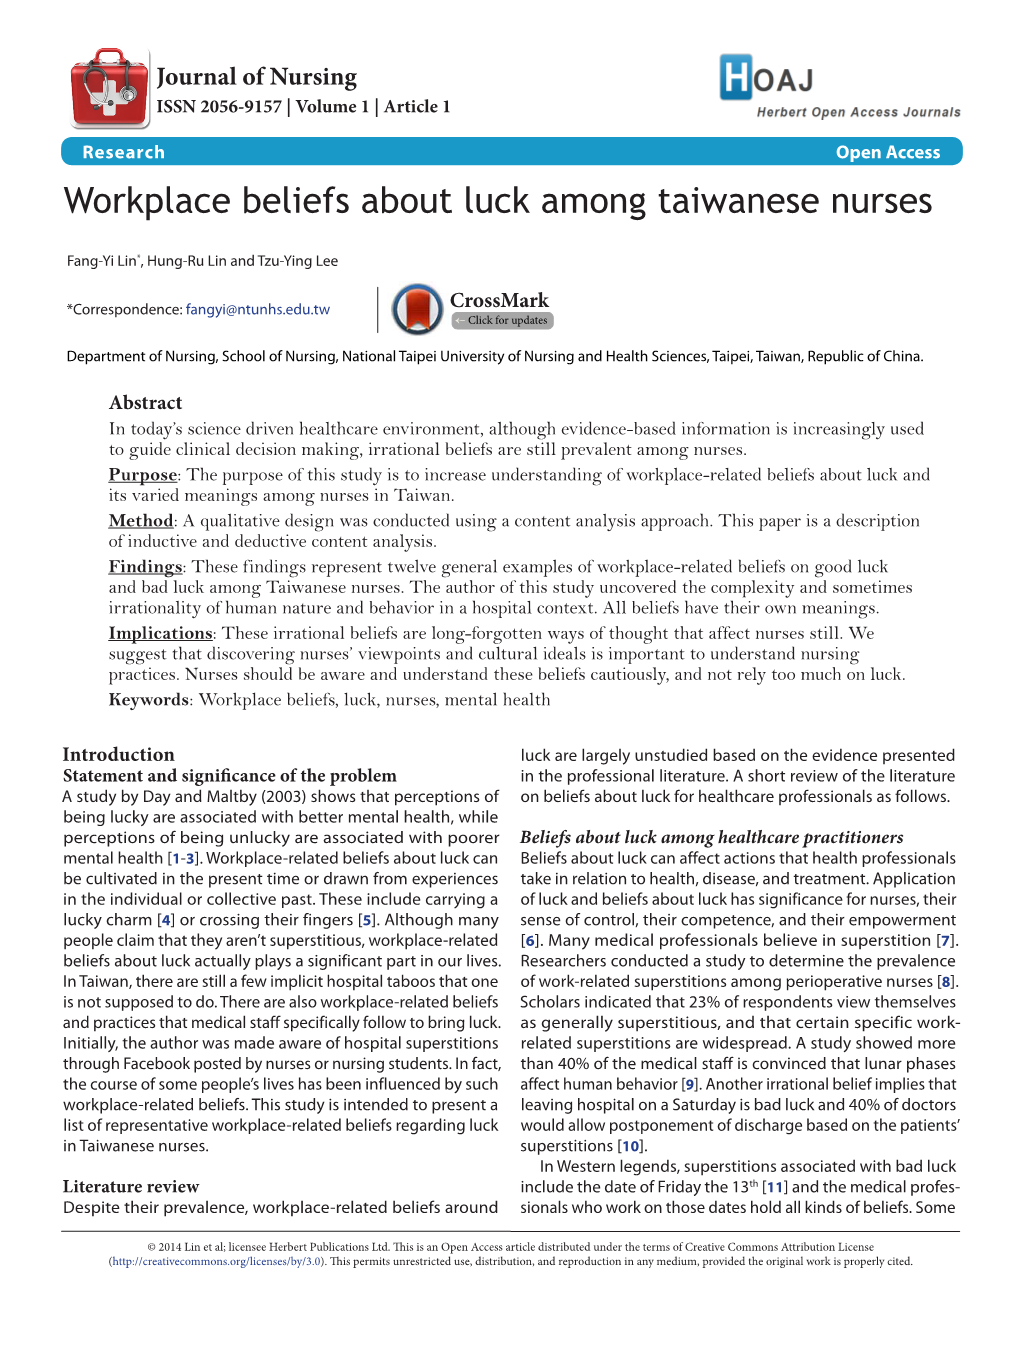 Workplace Beliefs About Luck Among Taiwanese Nurses